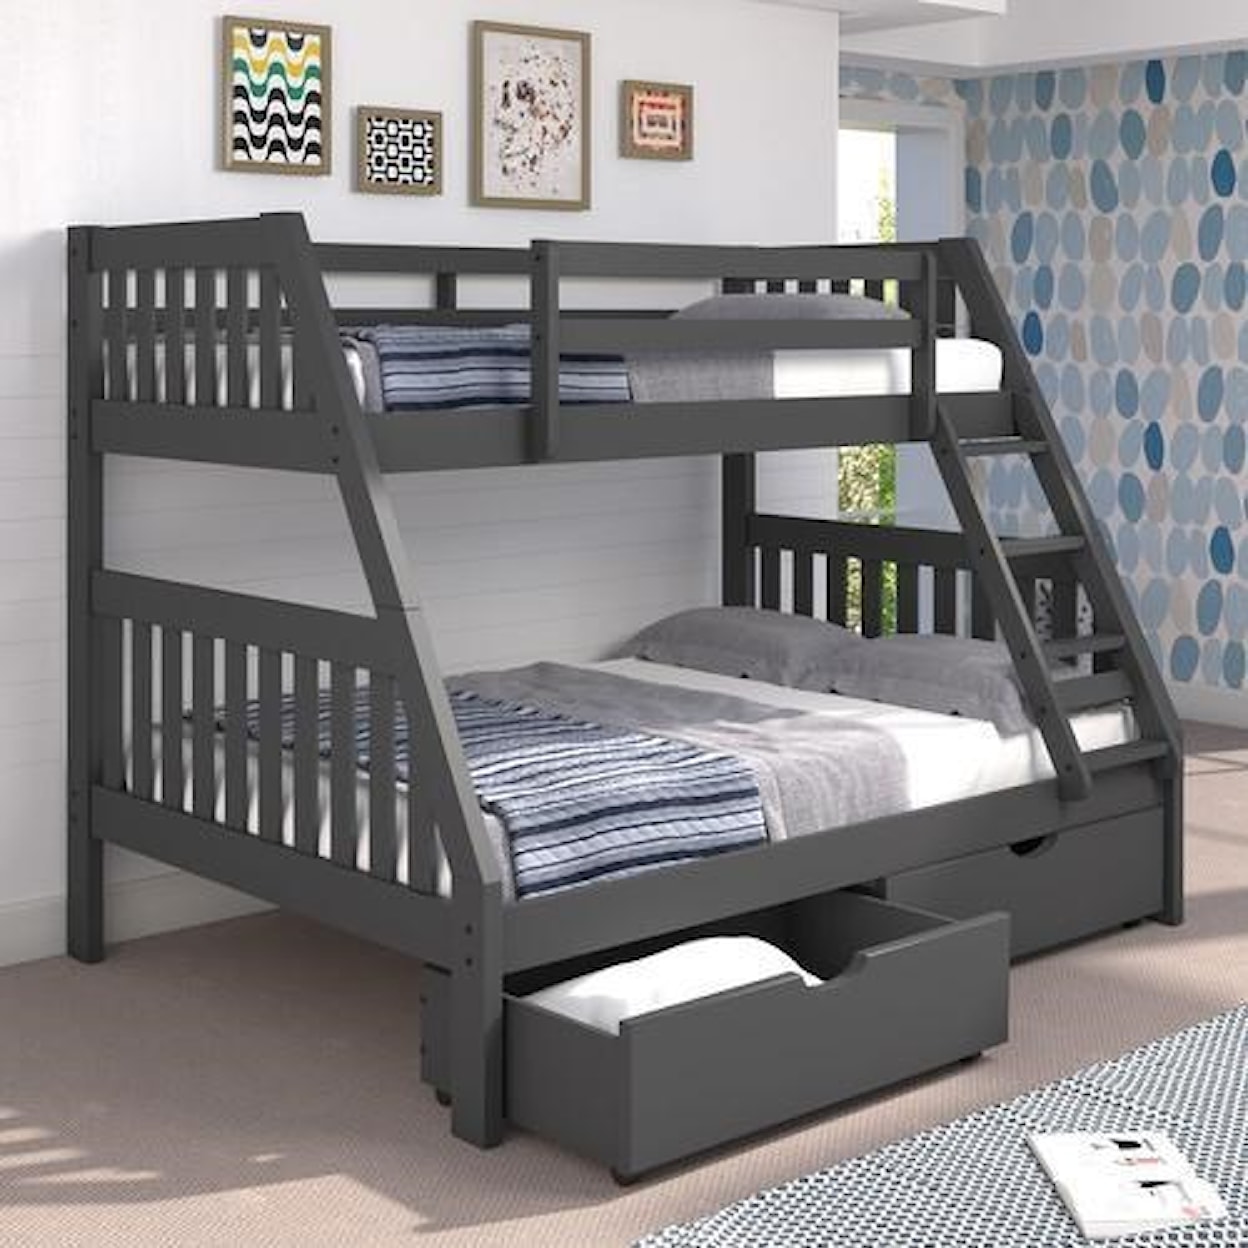 Canal House Bunk Beds Twin-Over-Full Bunk Bed with Drawers